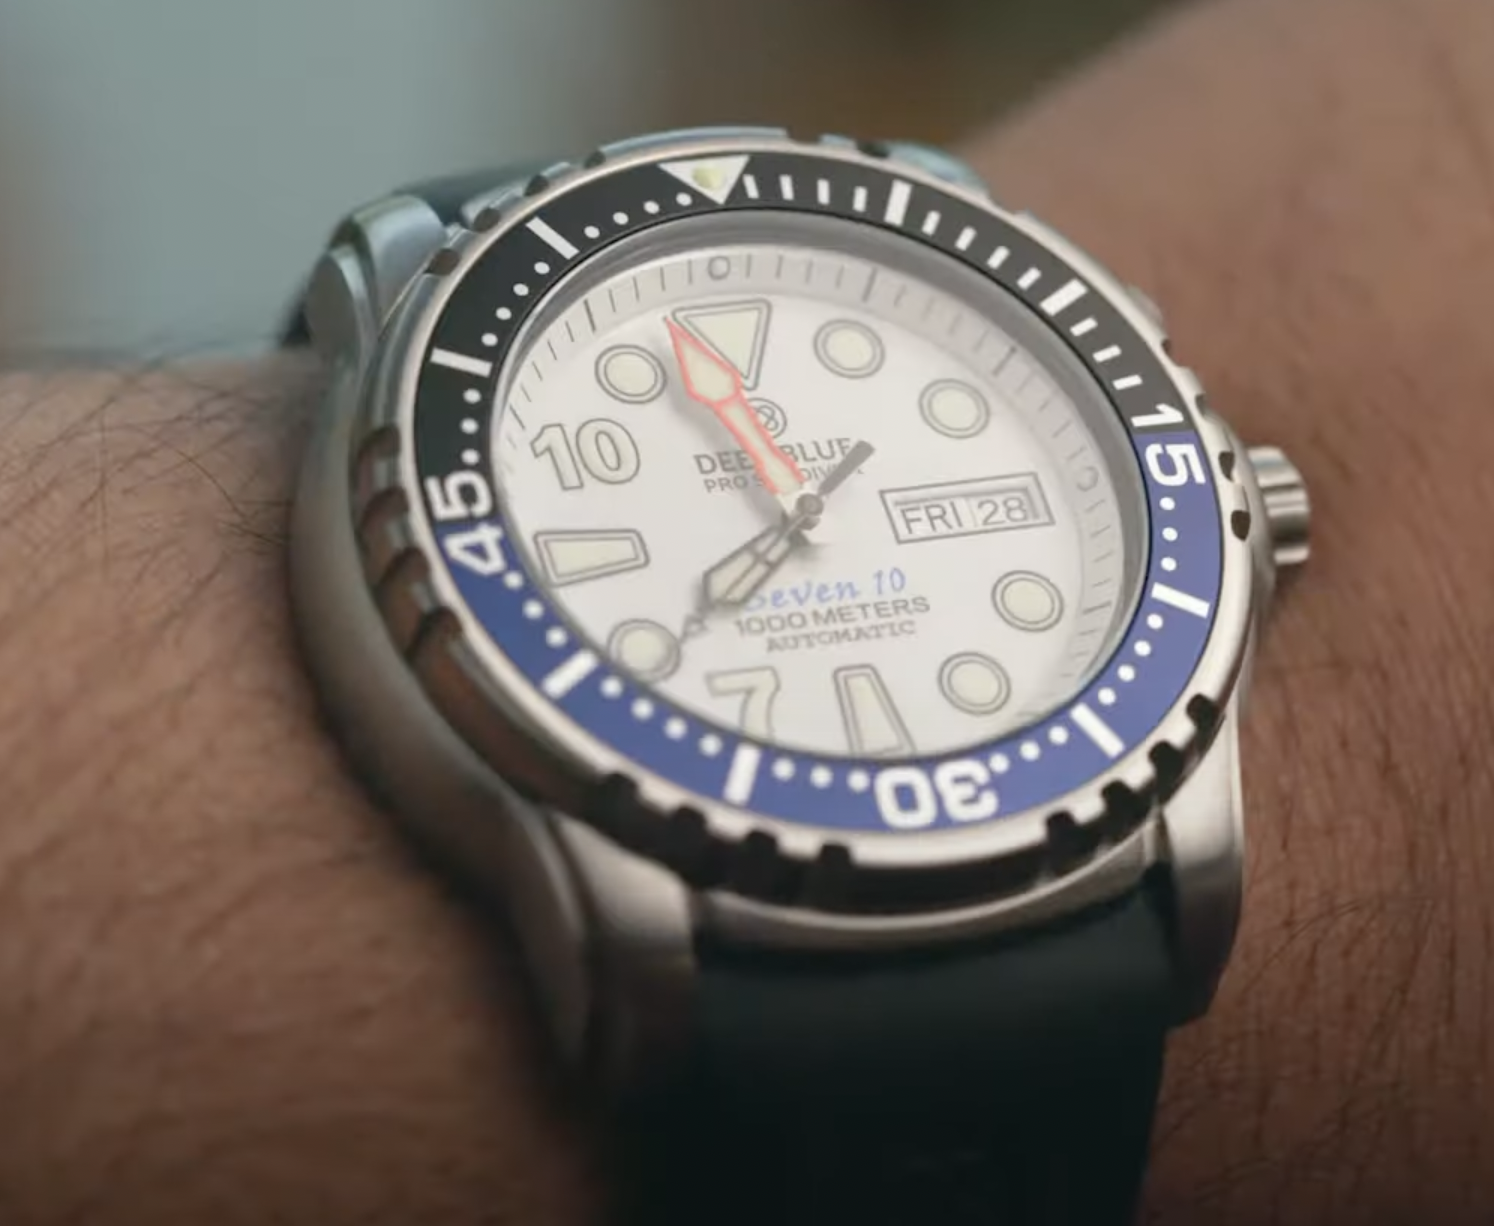 Every Watch Tells a Story: I own a Rolex Hulk, but this is why I enjoy indies like Deep Blue